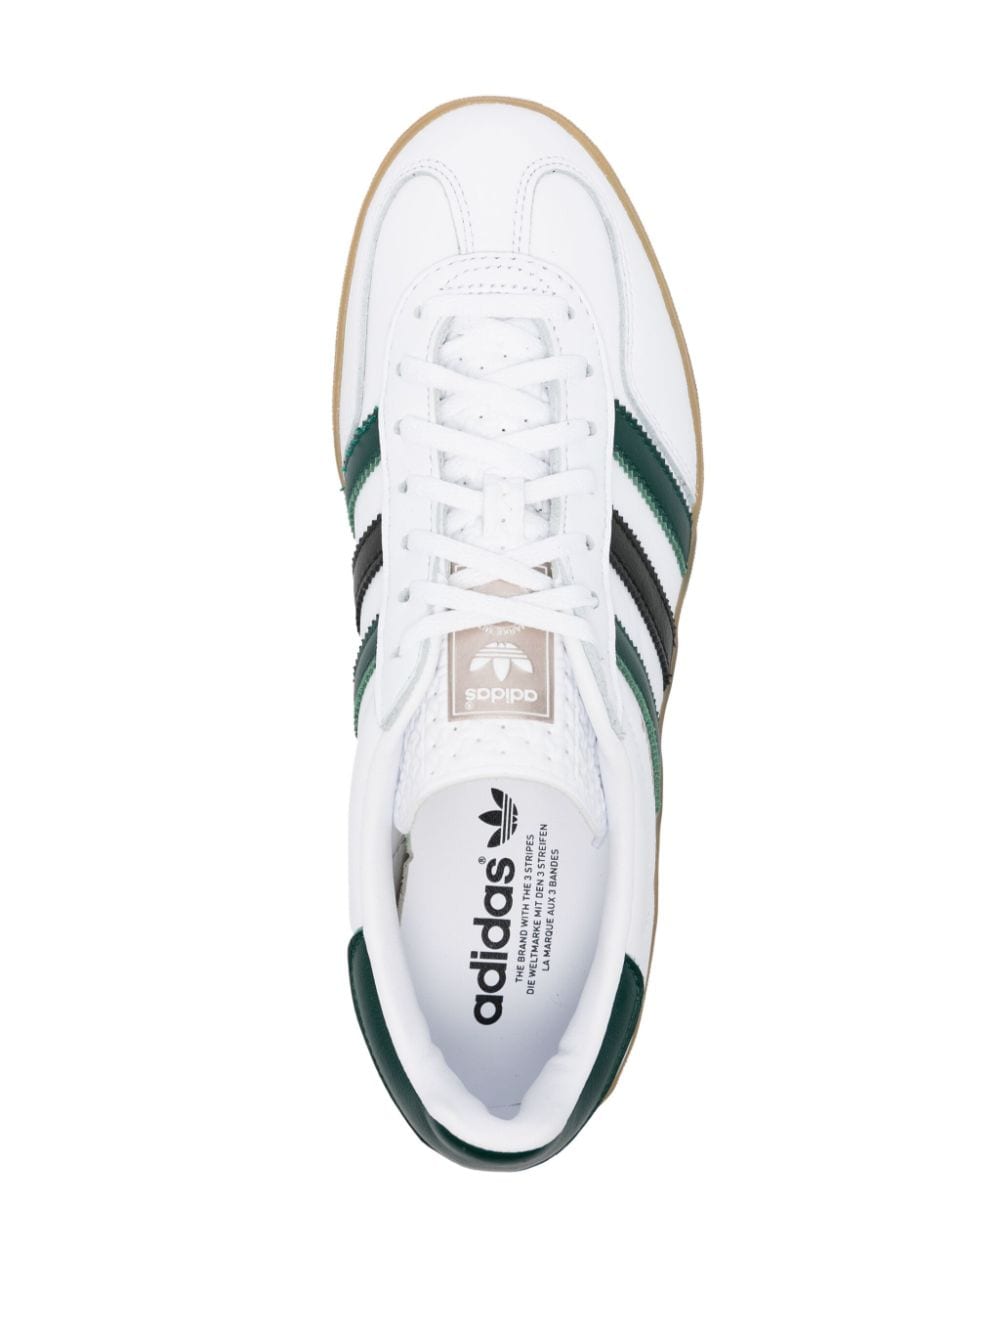 Shop Adidas Originals Gazelle Leather Sneakers In White